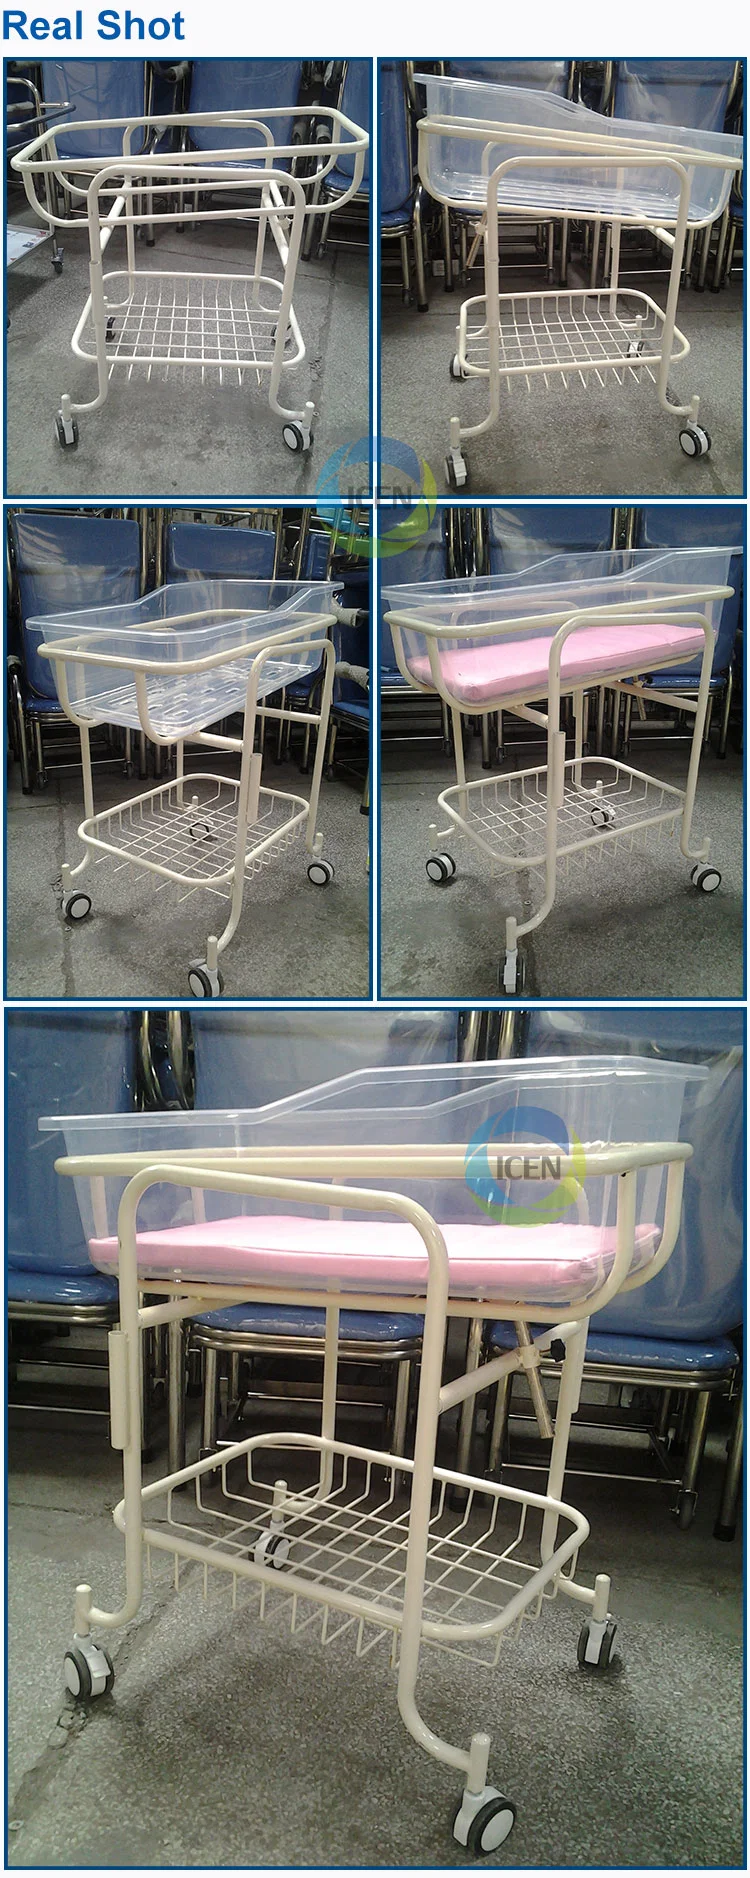 in-606 Hospital Height Adjustable Baby Cot Newborn Baby Trolley Medical Child Bed Portable Infant Bed